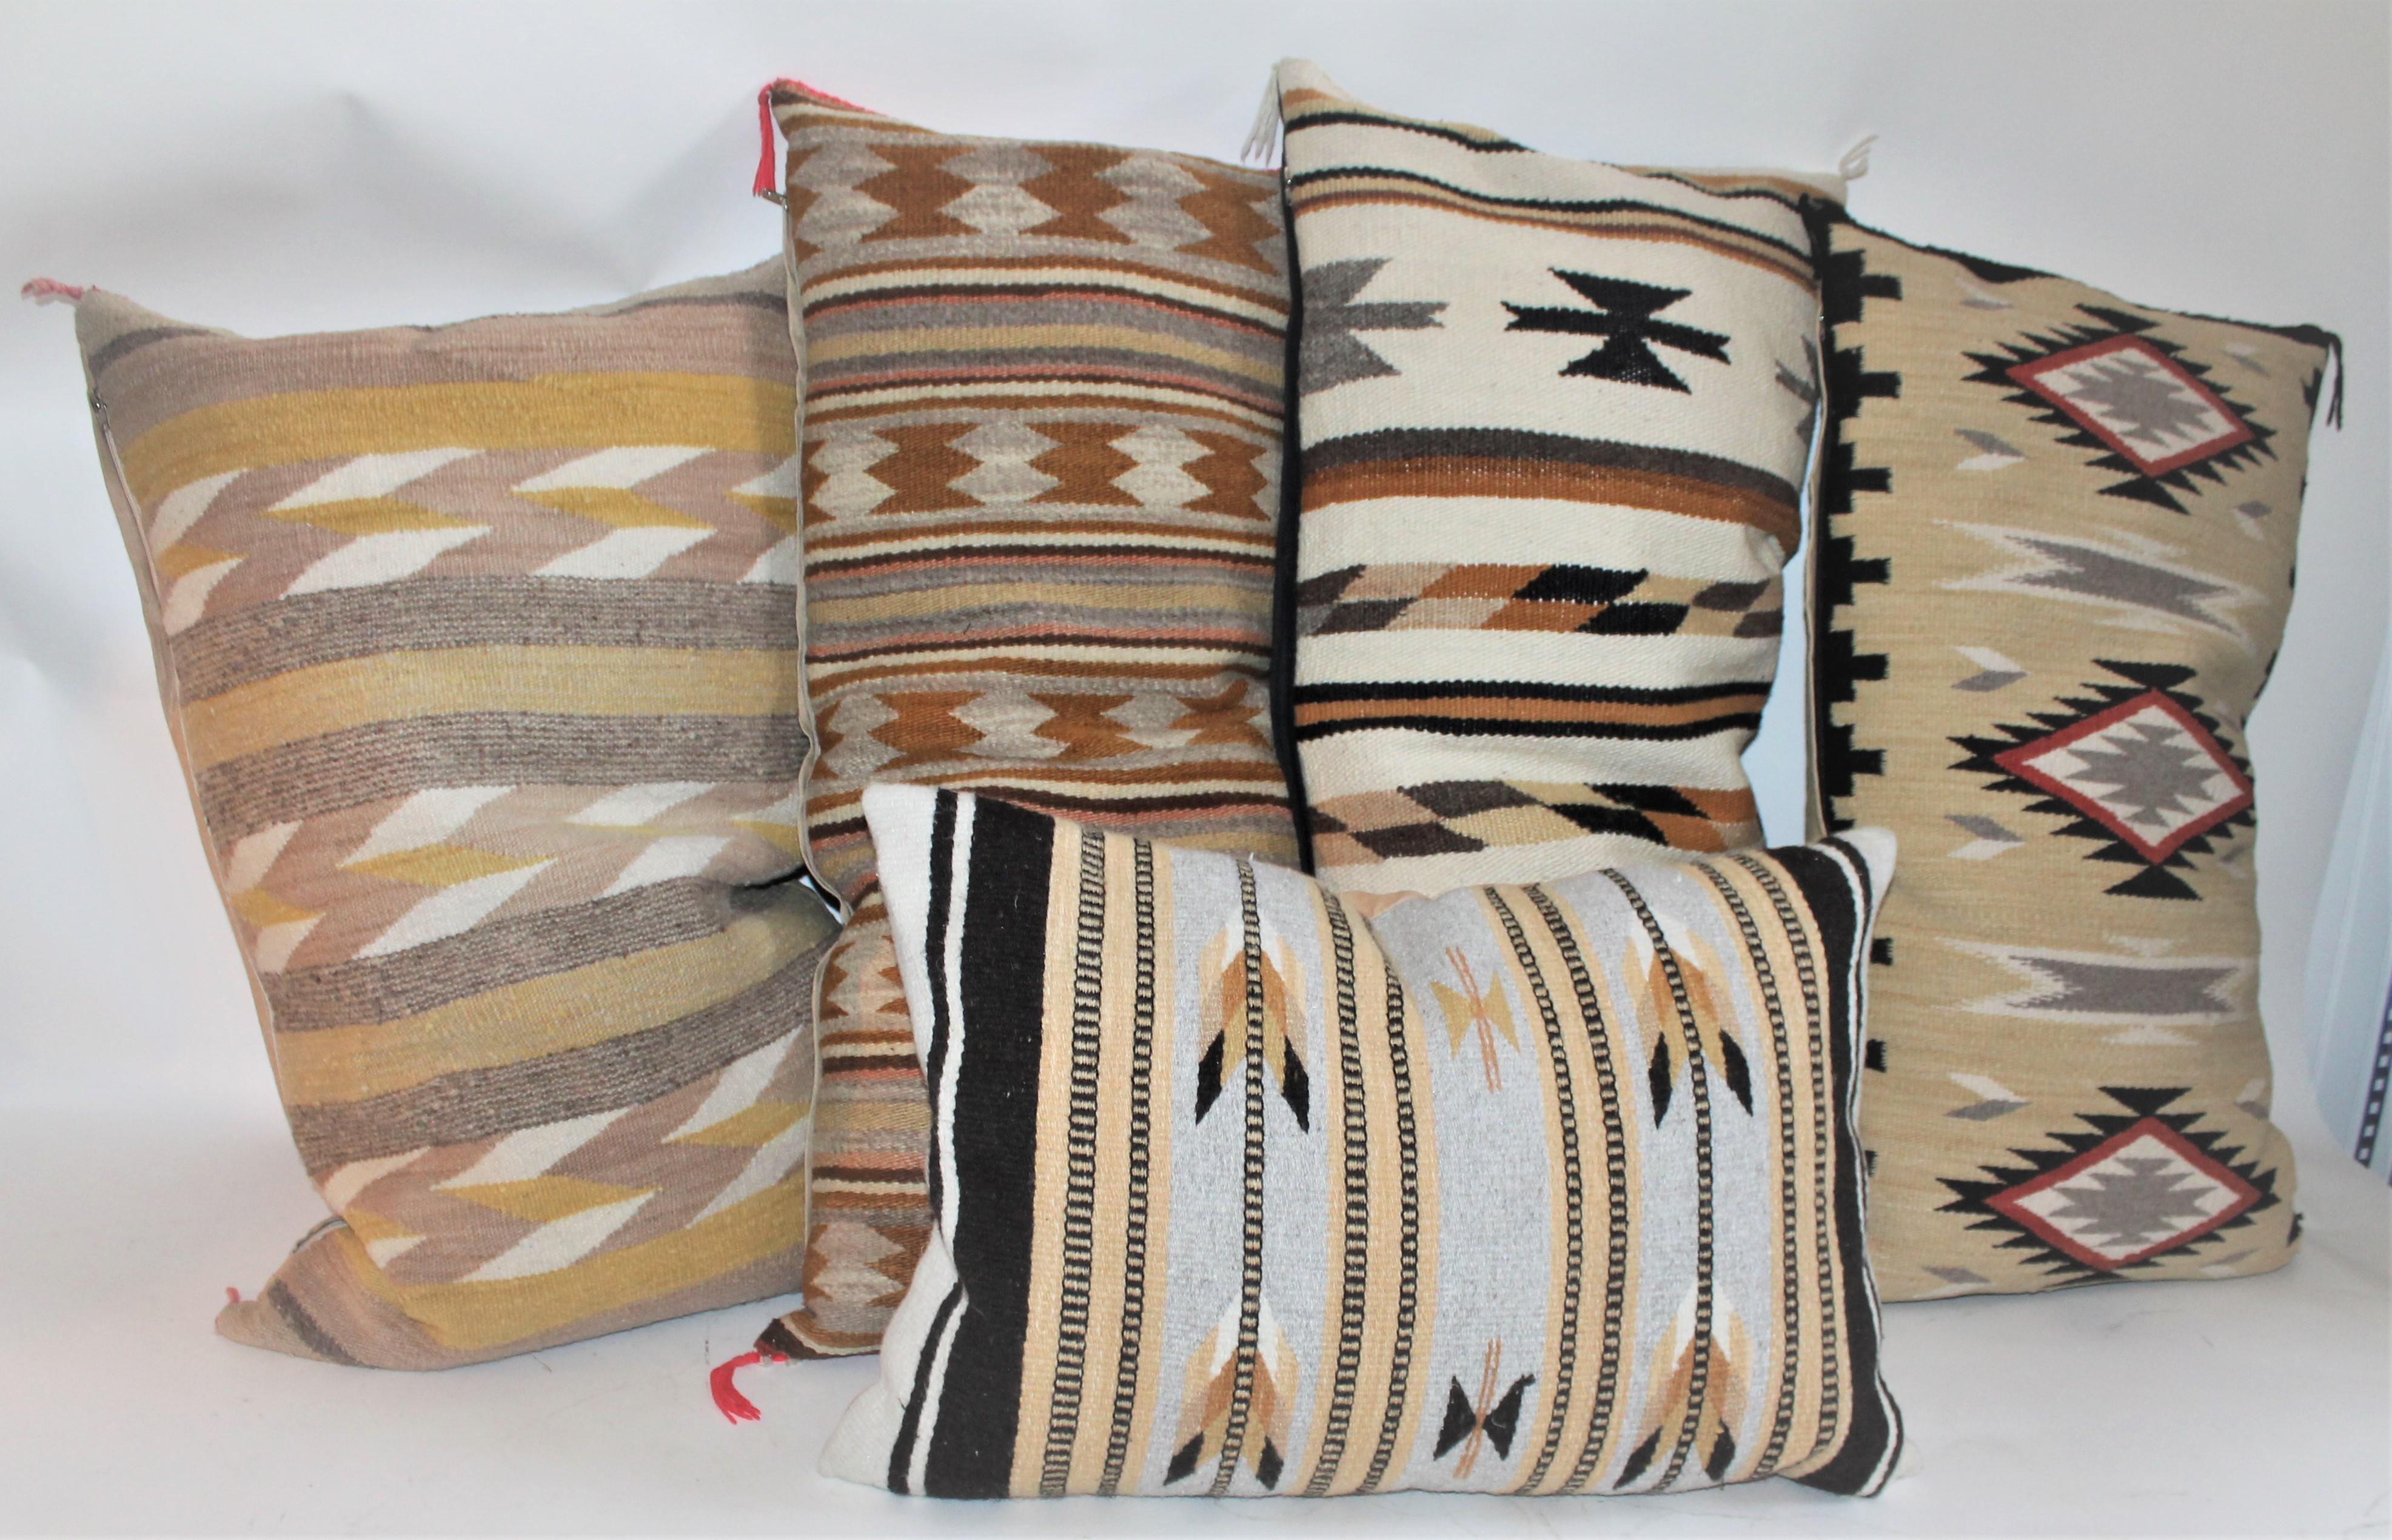 These pillows have been measured in a sequence of left to right from the primary/first image. Geometric Indian weaving bolster pillows. Individually $ 895.00 each.

Measures: 26 x 16
31 x 21
36 x 17
36 x 19
34 x 19.